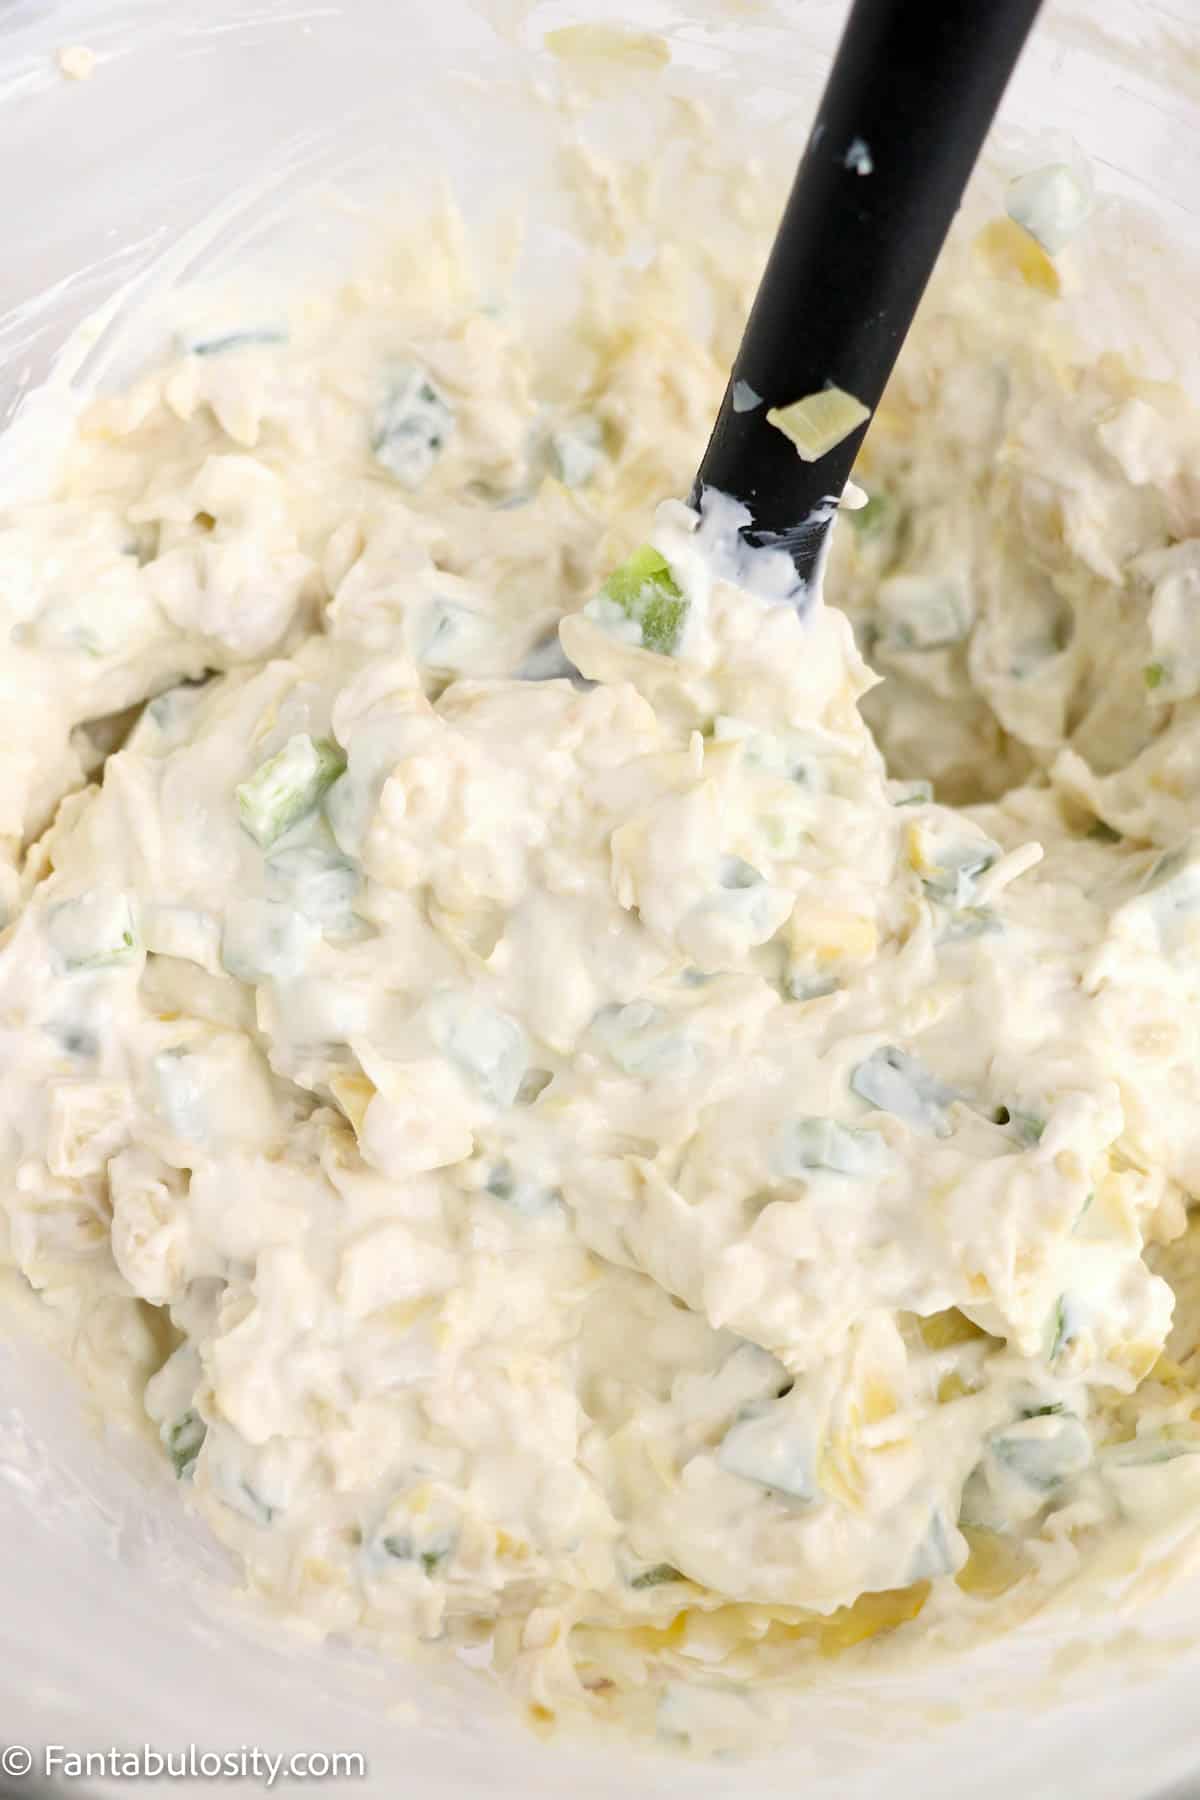 Jalapeno artichoke dip being stirred together in a mixing bowl.